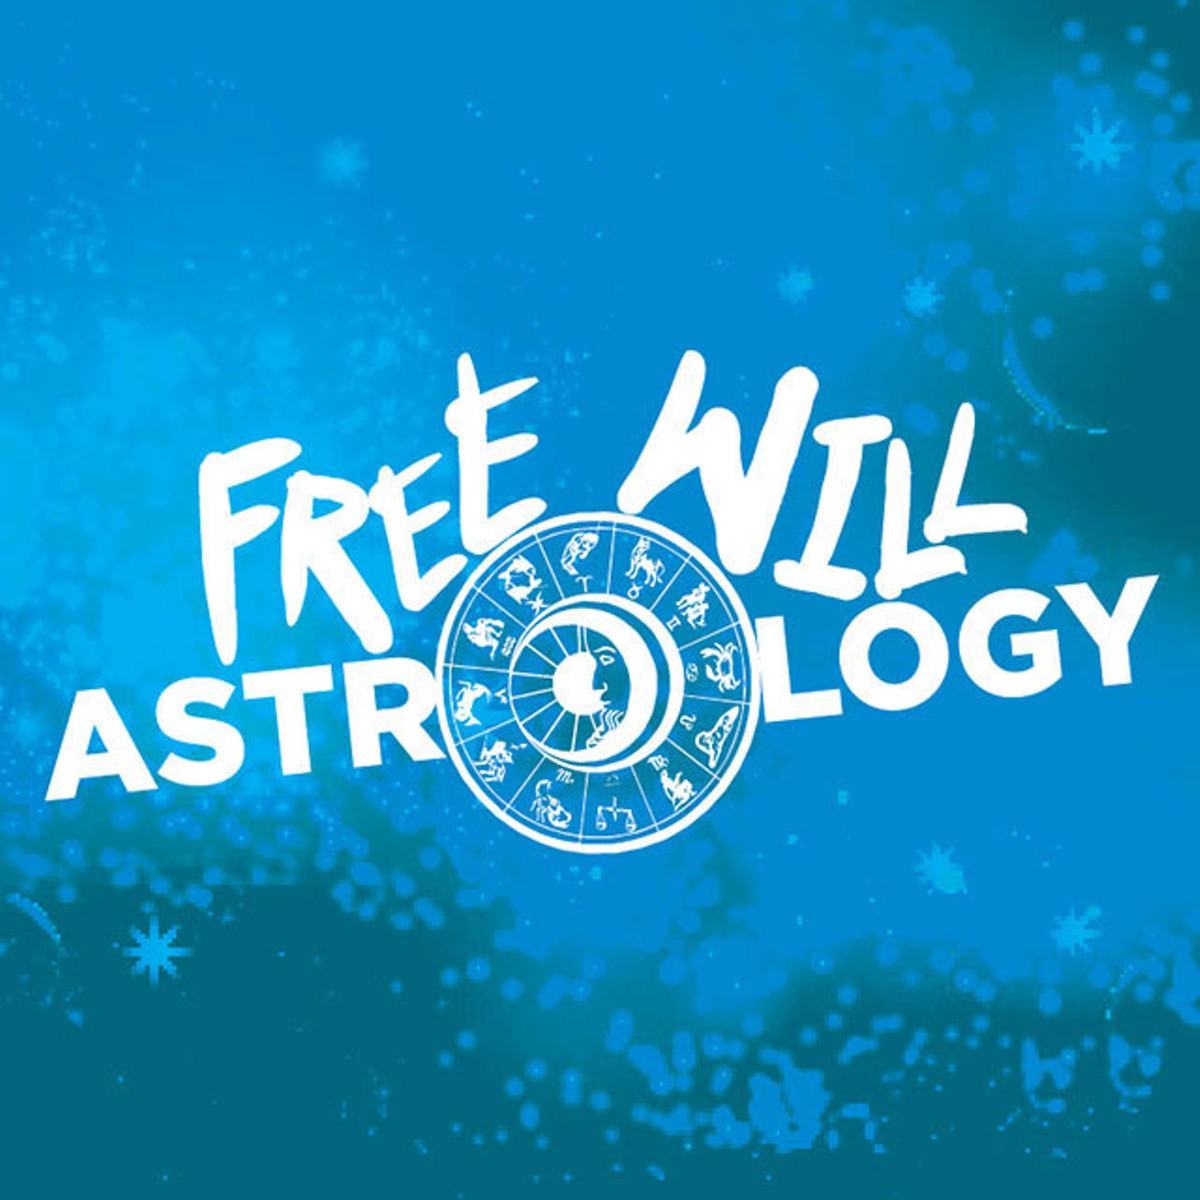 The universe has always played tricks on you: Free Will Astrology for the week of May 6-12